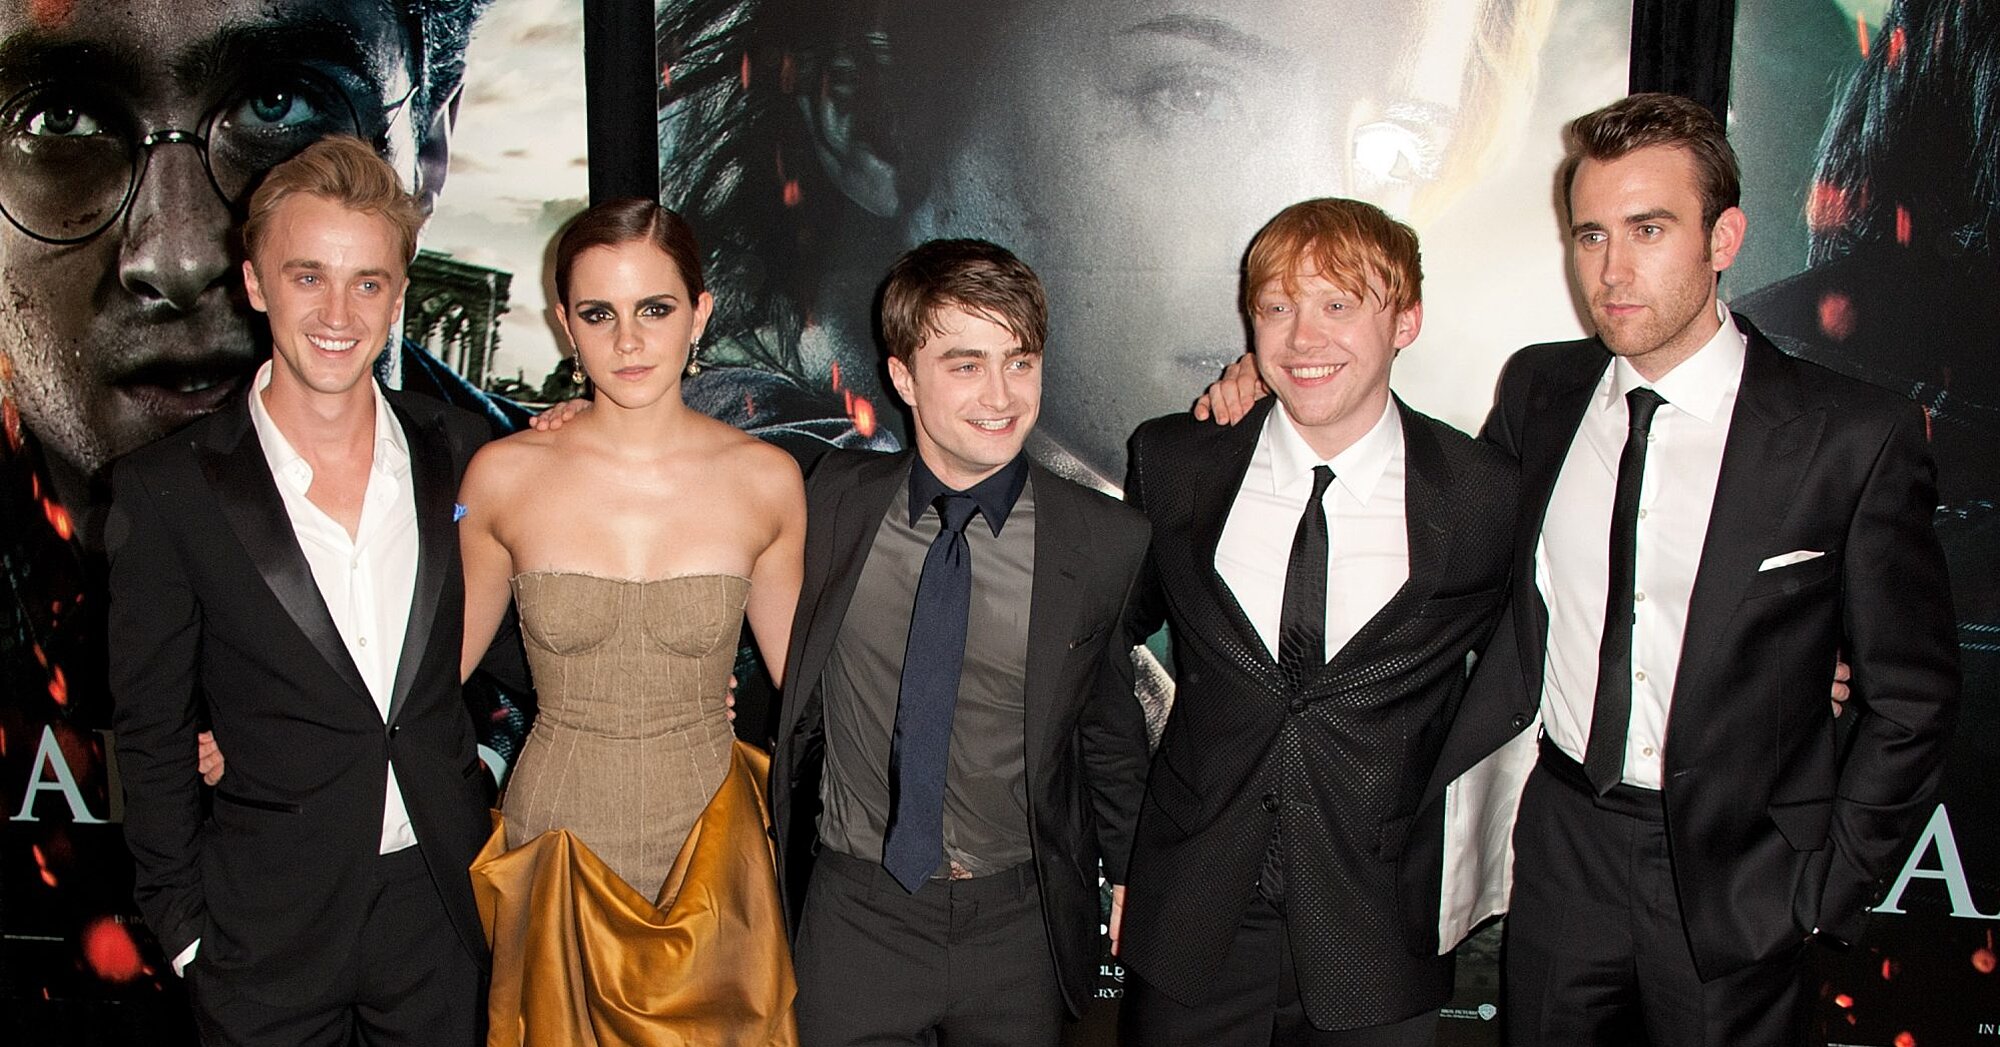 The Cast of Harry Potter Reunited 19 Years After The First Film